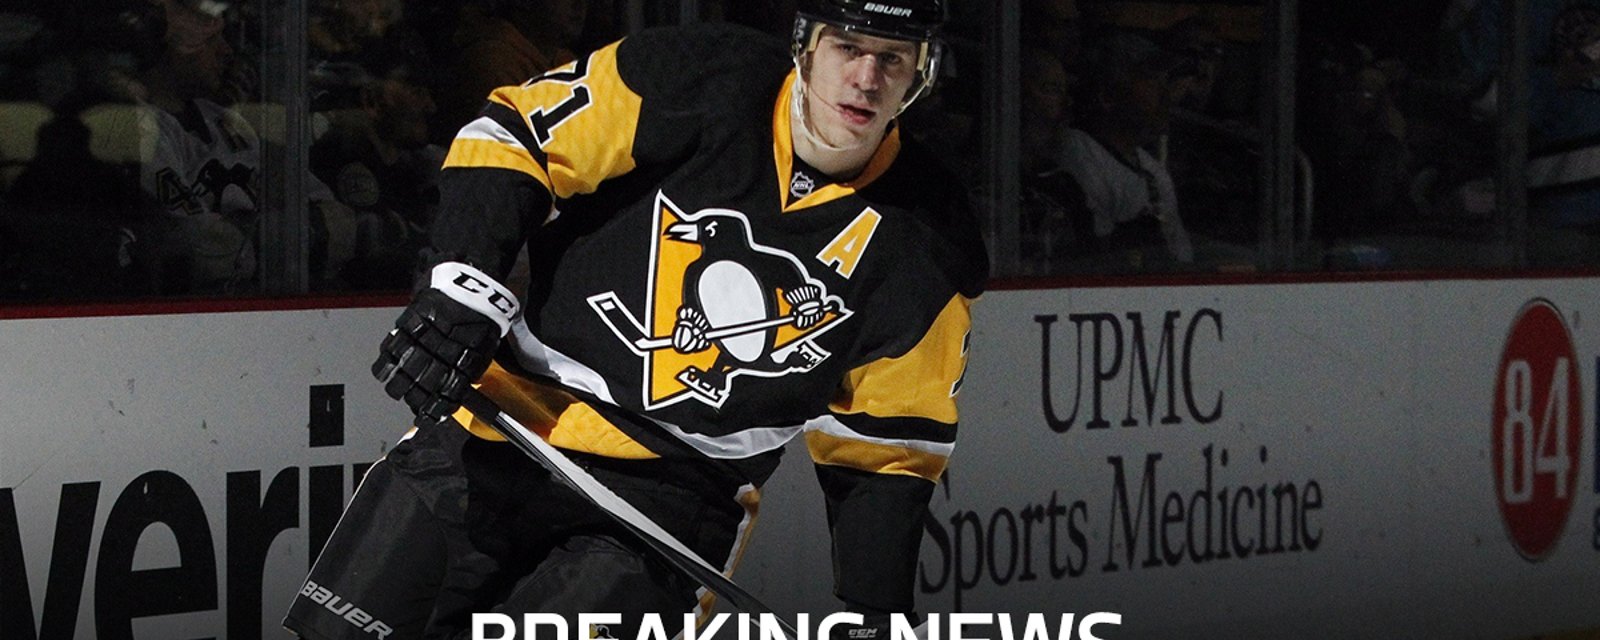 Breaking: More bad news about Evgeni Malkin